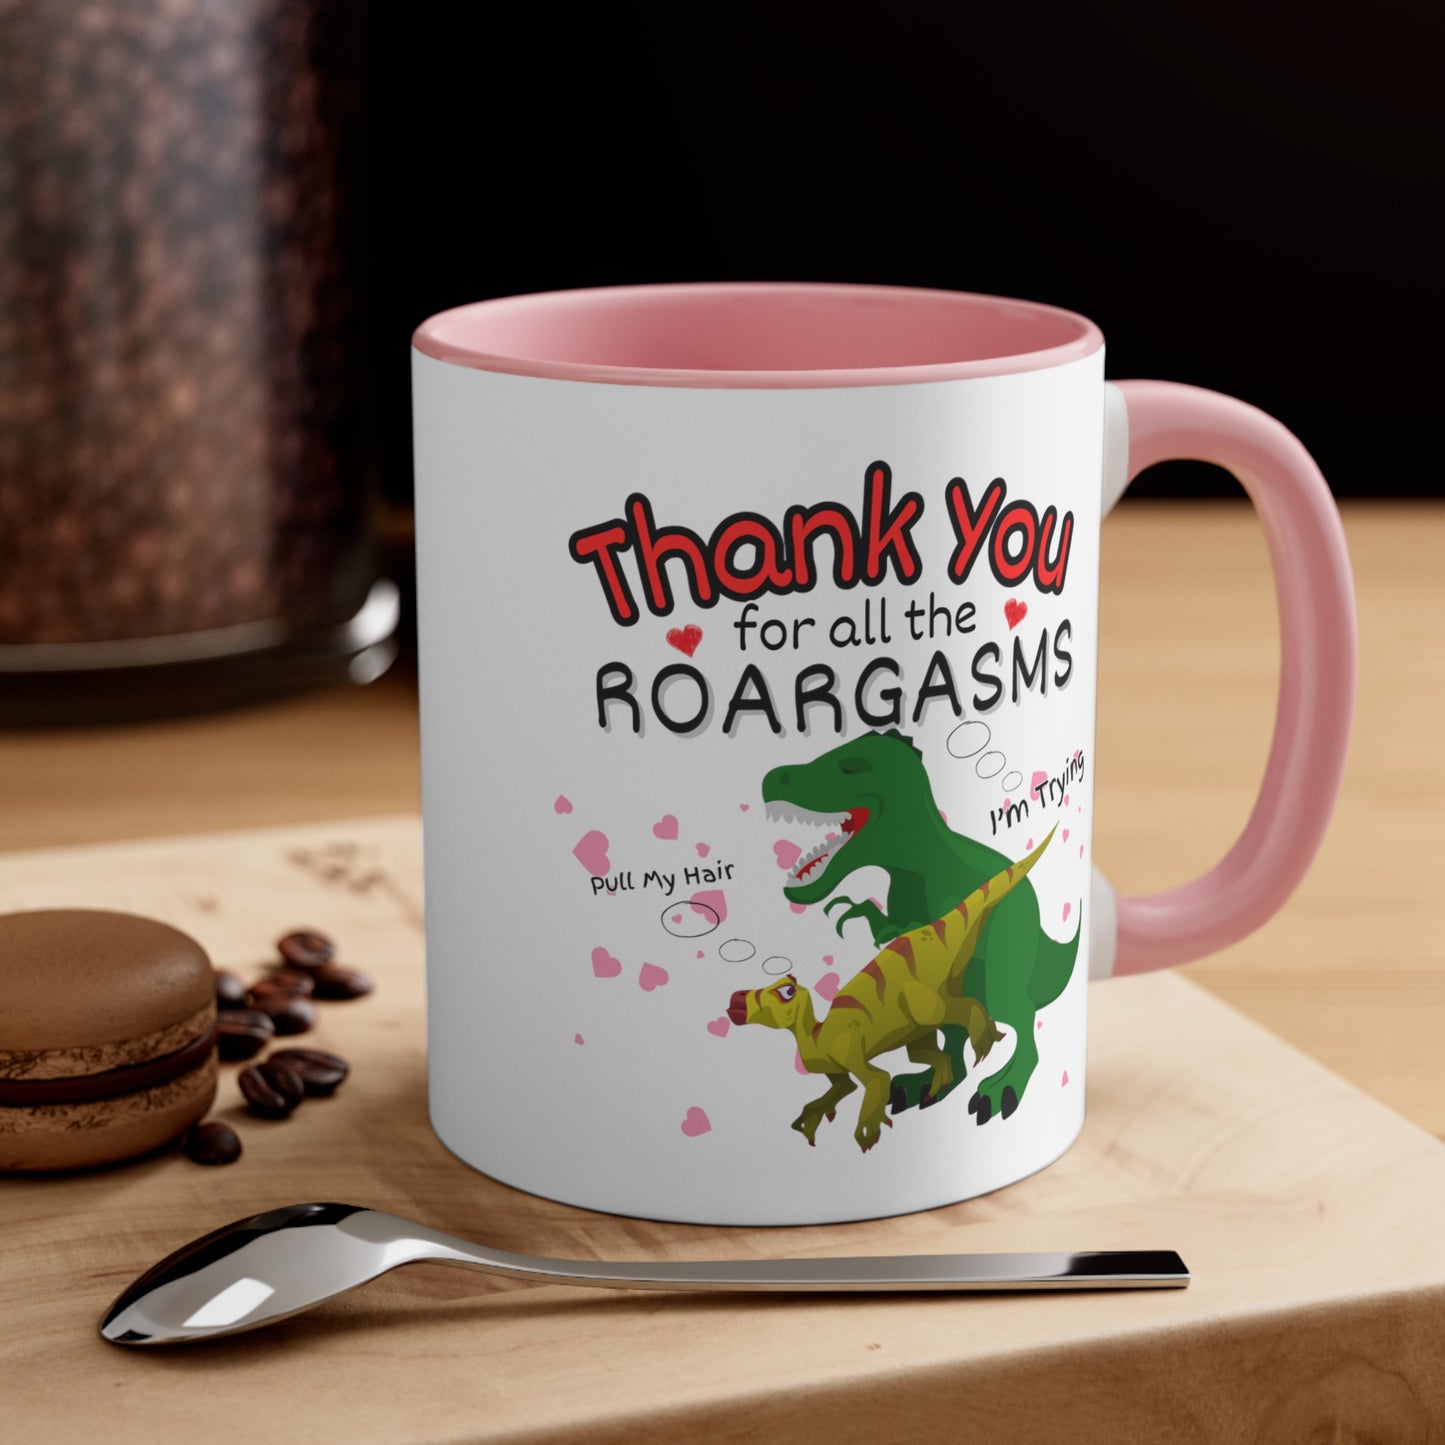 Thank You for All Roargasms, Valentine's Day Gift For Him, Valentines Gift for Him, Boyfriend Anniversary Gift, Husband Valentine Gift